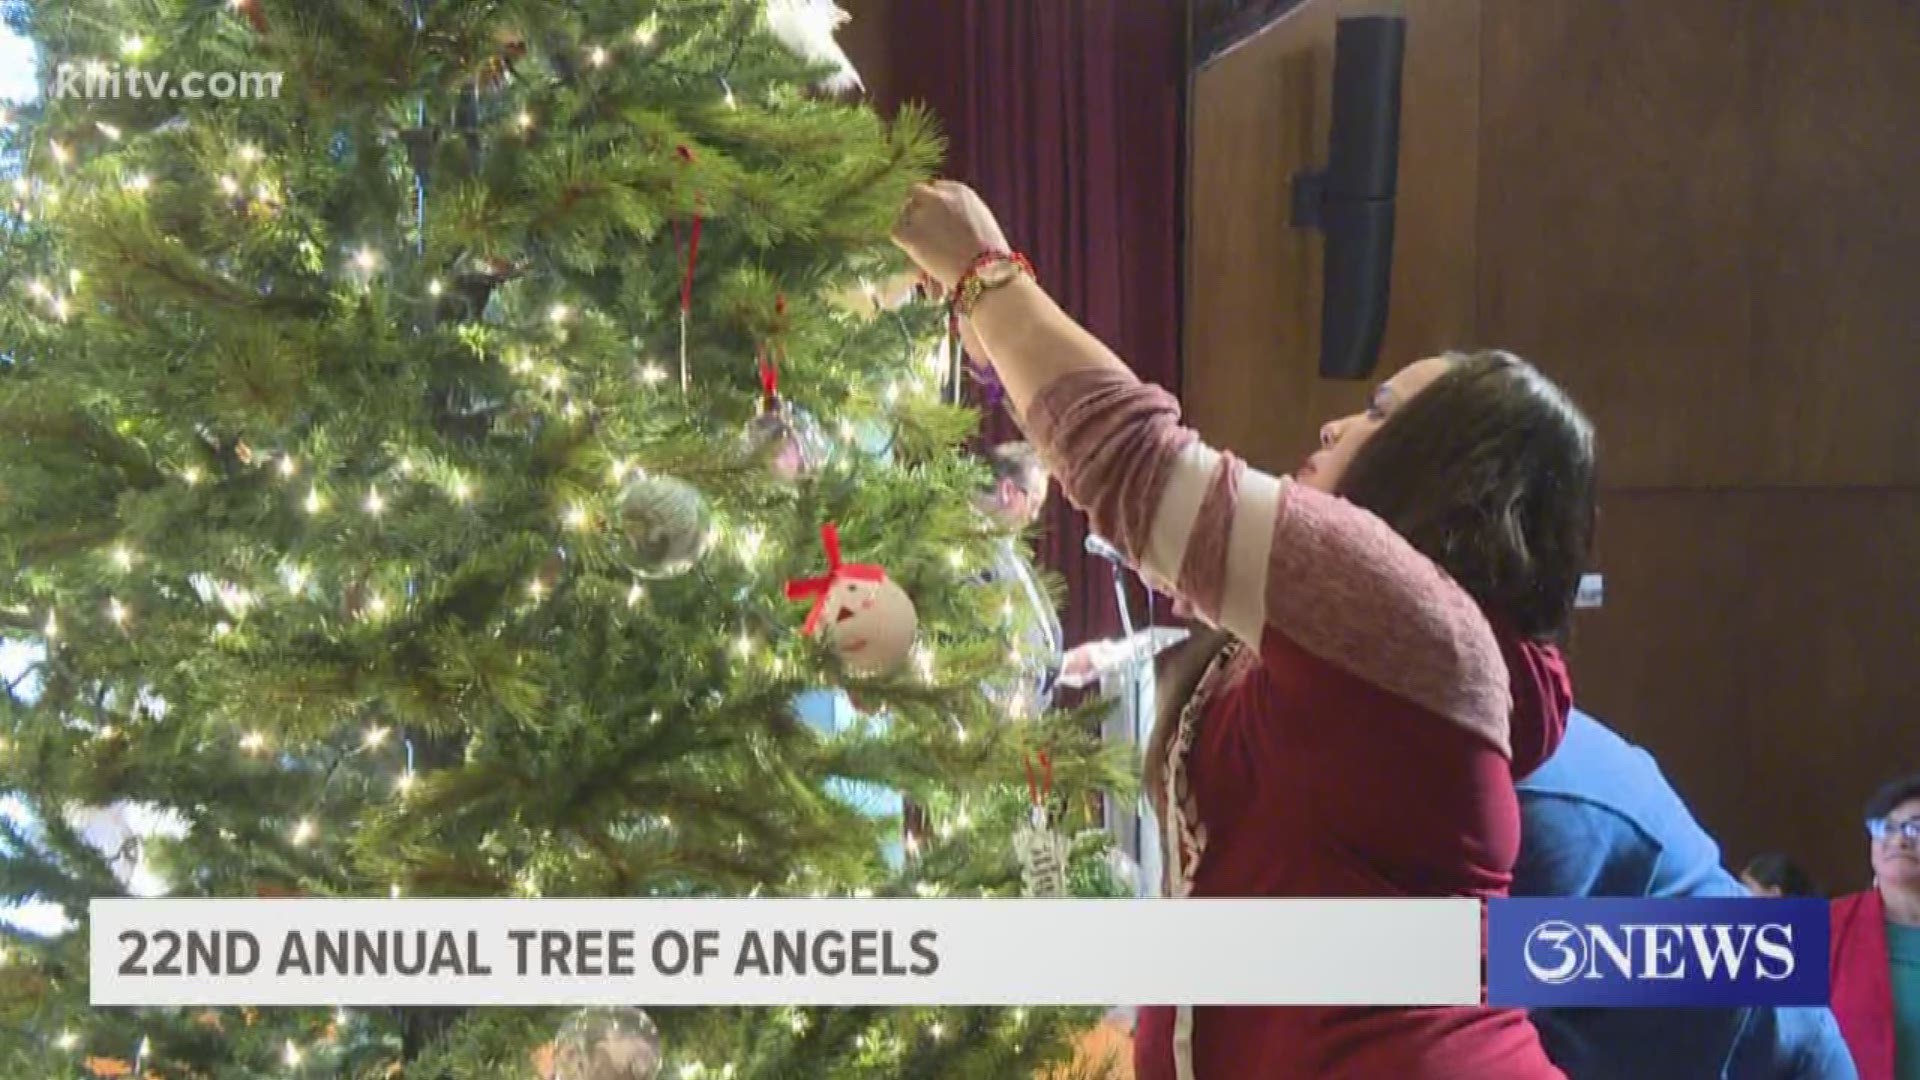 To honor victims, families who all share a unique bond will gather Thursday for the 22nd annual Tree of Angels ceremony.